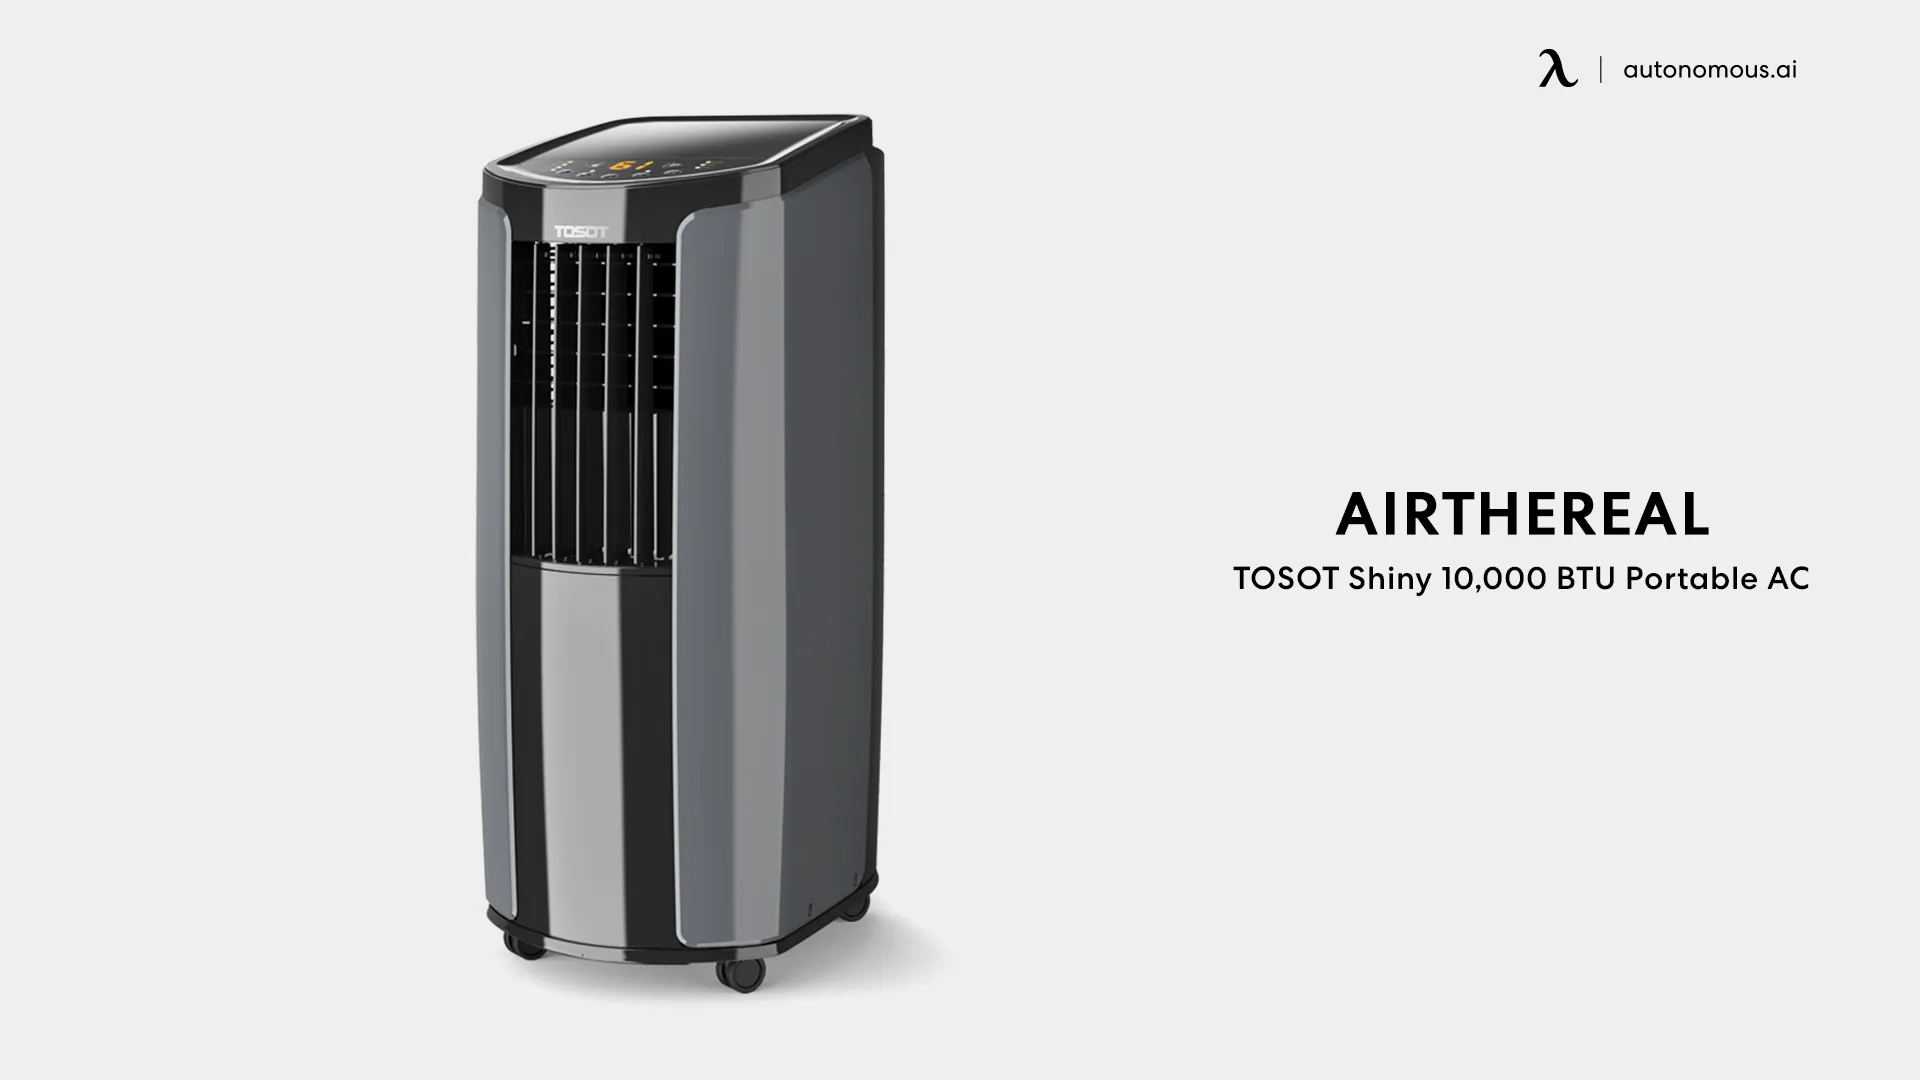 Airthereal TOSOT Shiny 10,000 BTU Portable AC